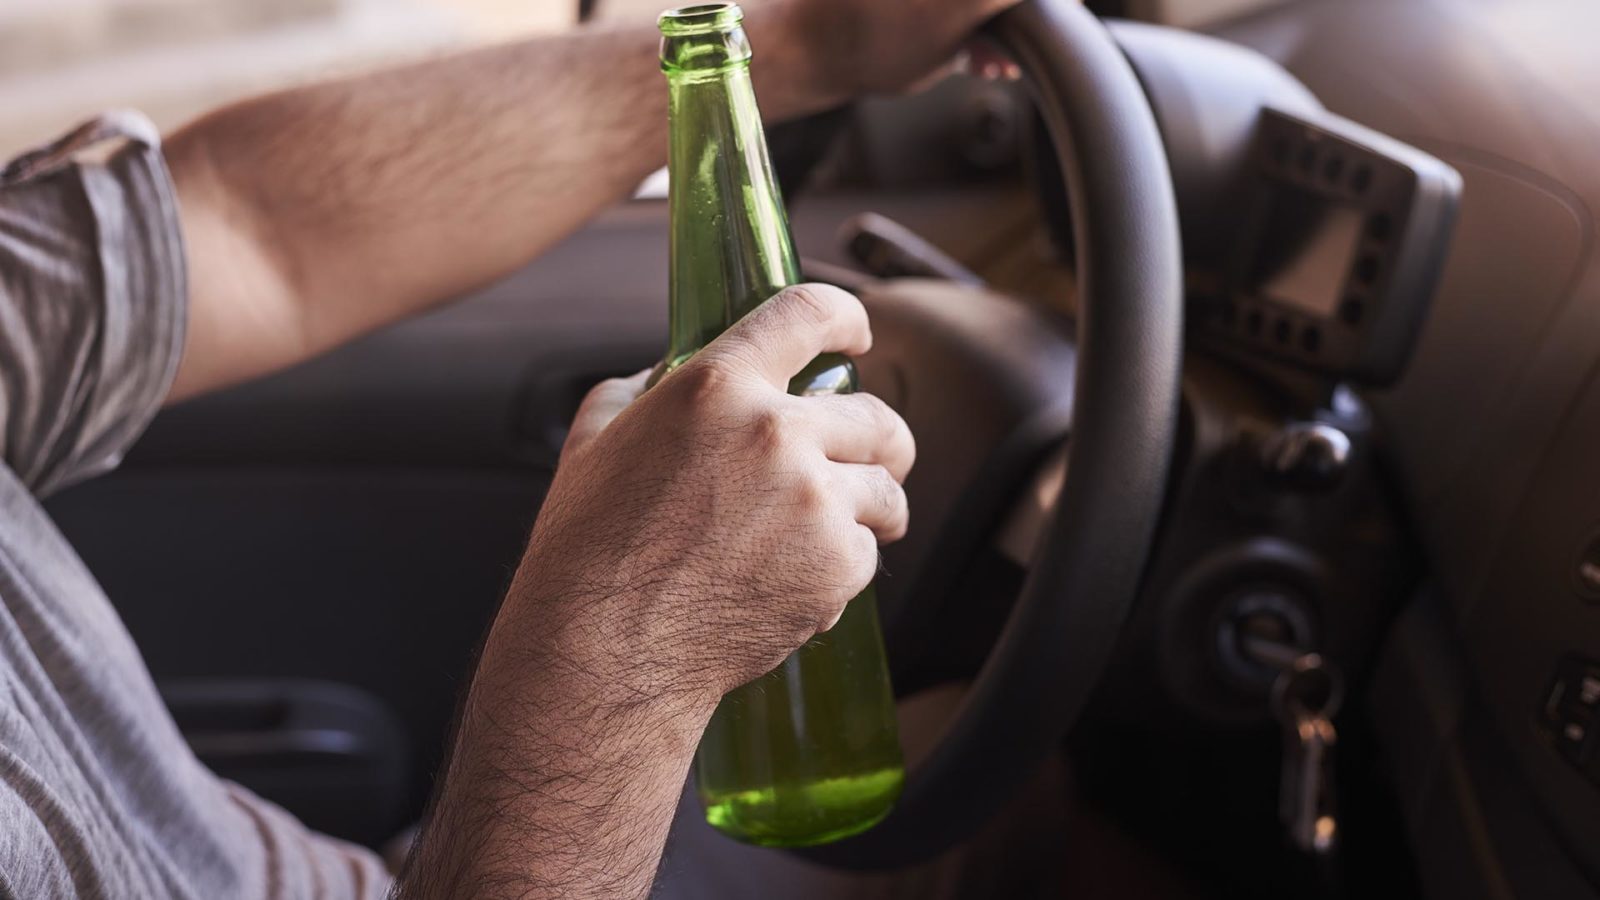 Texas Drunk Driving Laws and Penalties